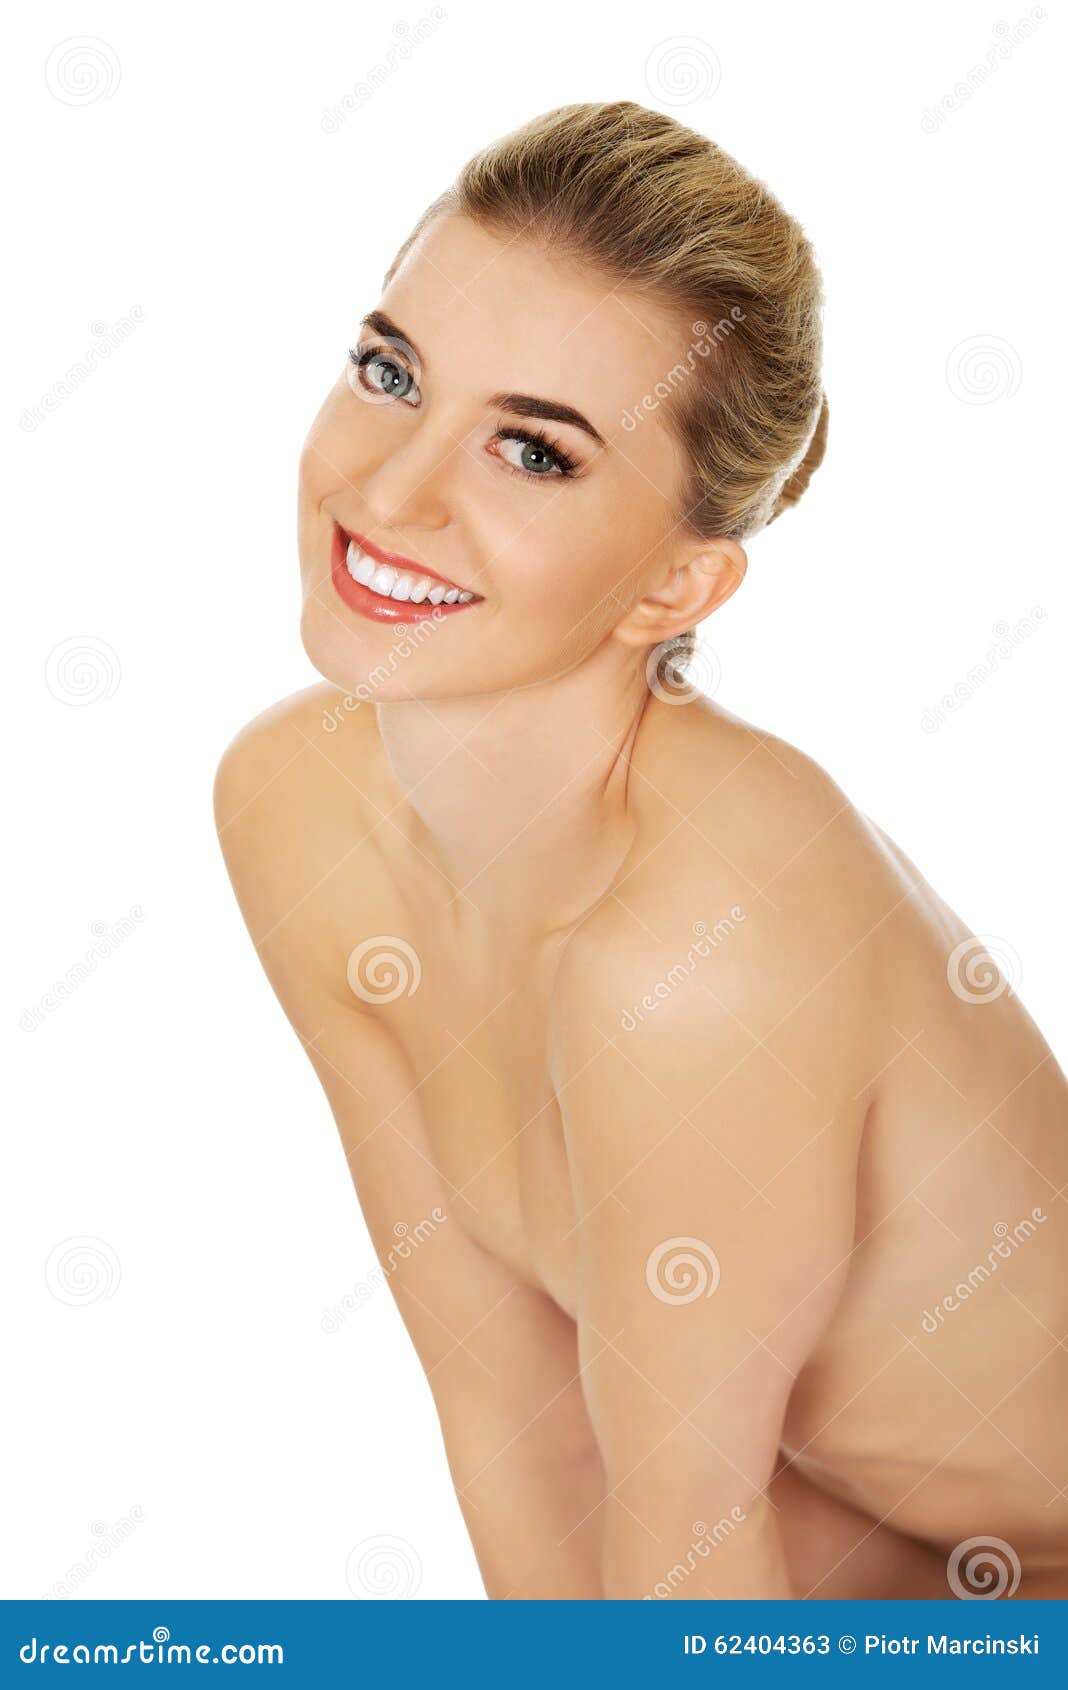 Nude And Smiling Dumb Blonde Naked